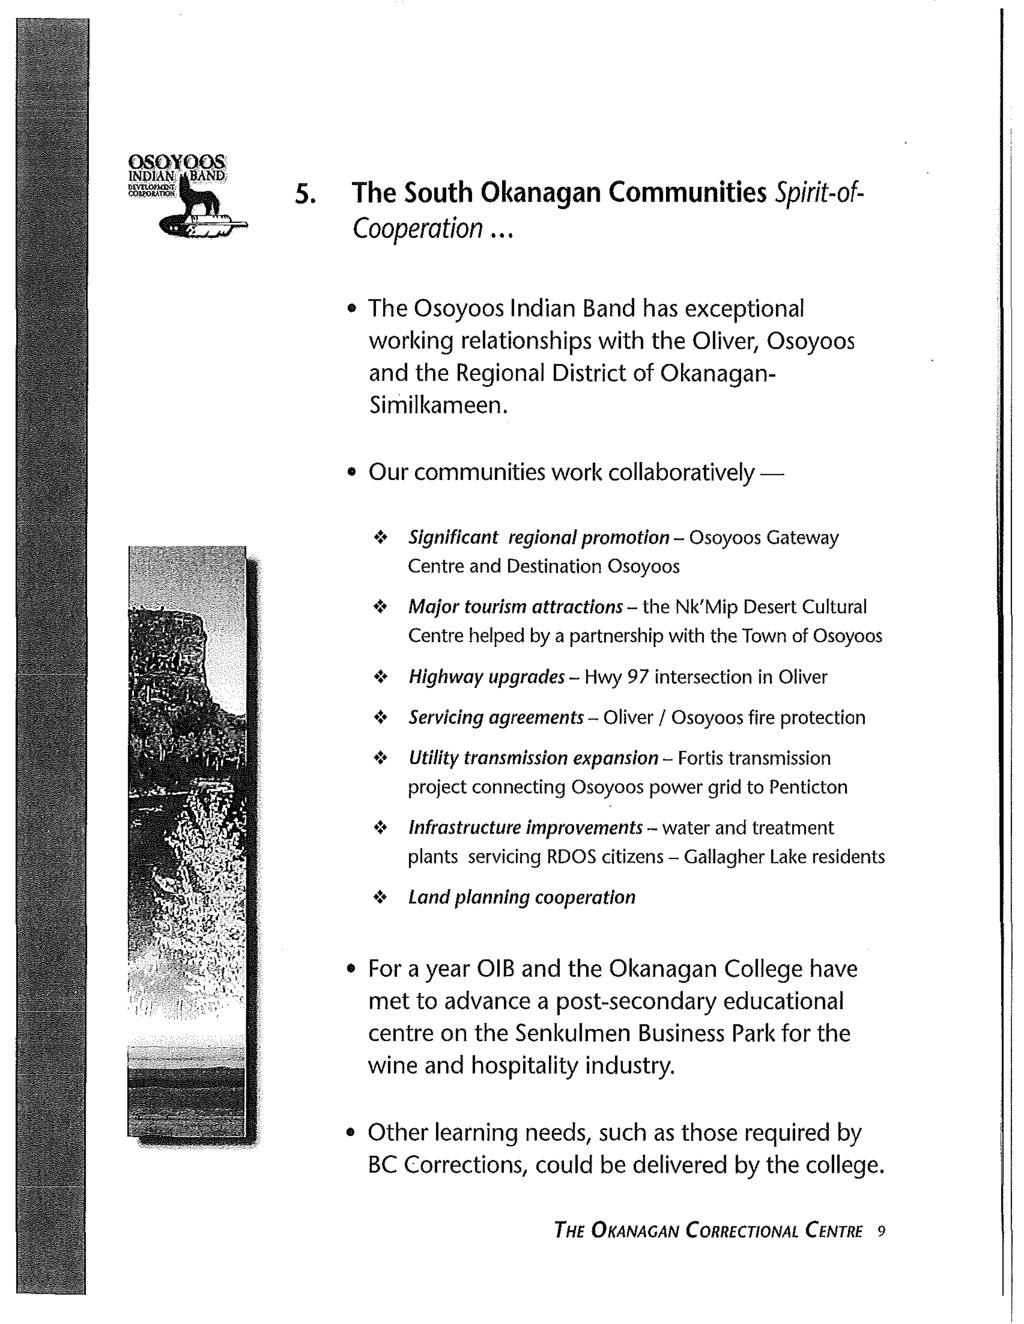 5. The South Okanagan Communities Spirit-of Cooperation... The Osoyoos Indian Band has exceptional working relationships with the Oliver, Osoyoos and the Regional District of Okanagan Similkameen.